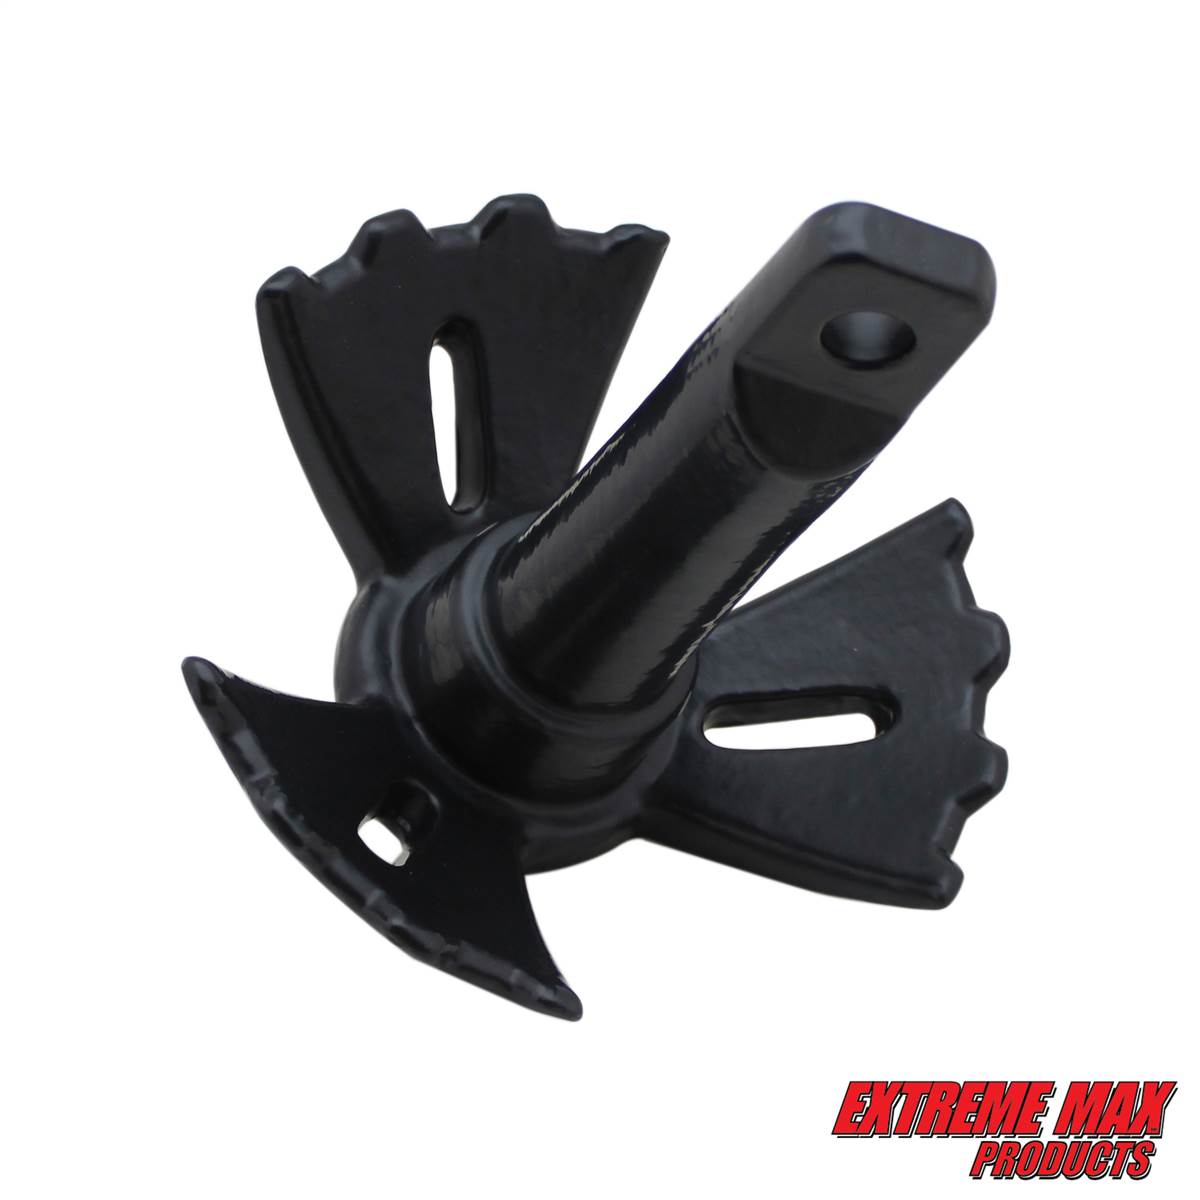 Extreme Max 3006.6560 BoatTector Vinyl-Coated River Anchor - 30 lbs.